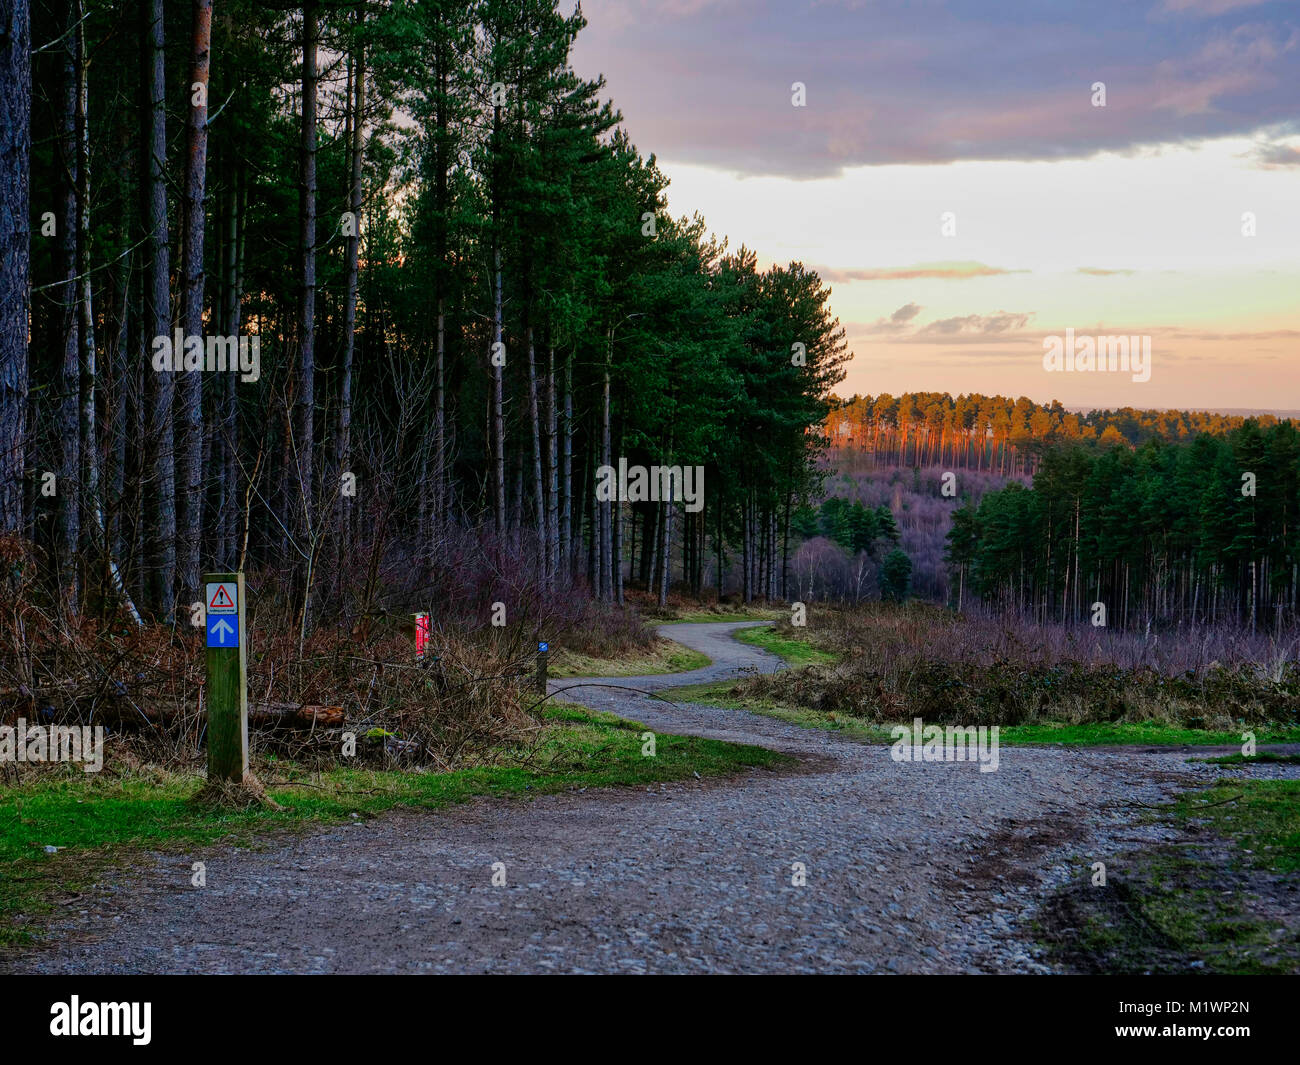 UK Weather; Loverly afternoon sunset light at the Fairoak Valley Pools on the Fairoak Trail, Cannock Chase, Staffordshire recommended by the Ordnance Survey OS it is number 76 in the ITV 100 favourite walks Stock Photo